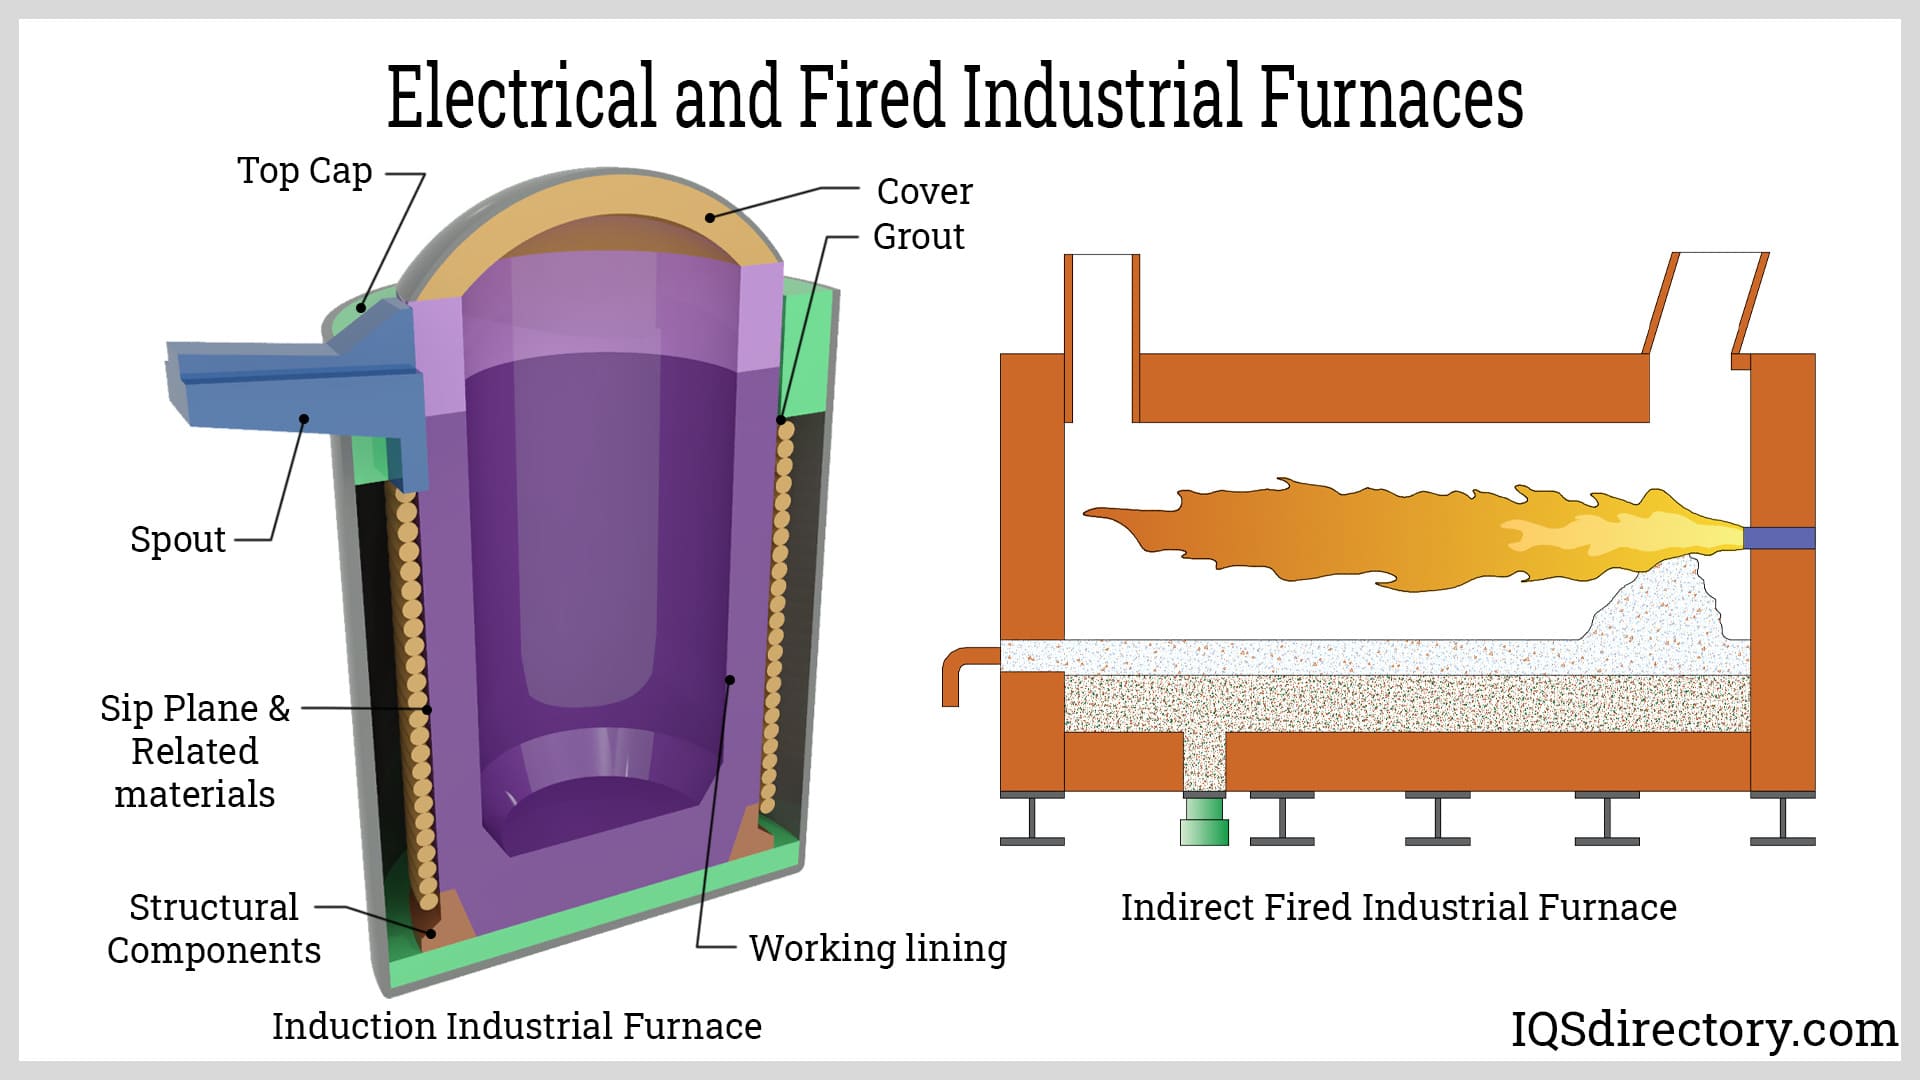 A Guide To Industrial Furnace Features And Types - Abbott Furnace Company